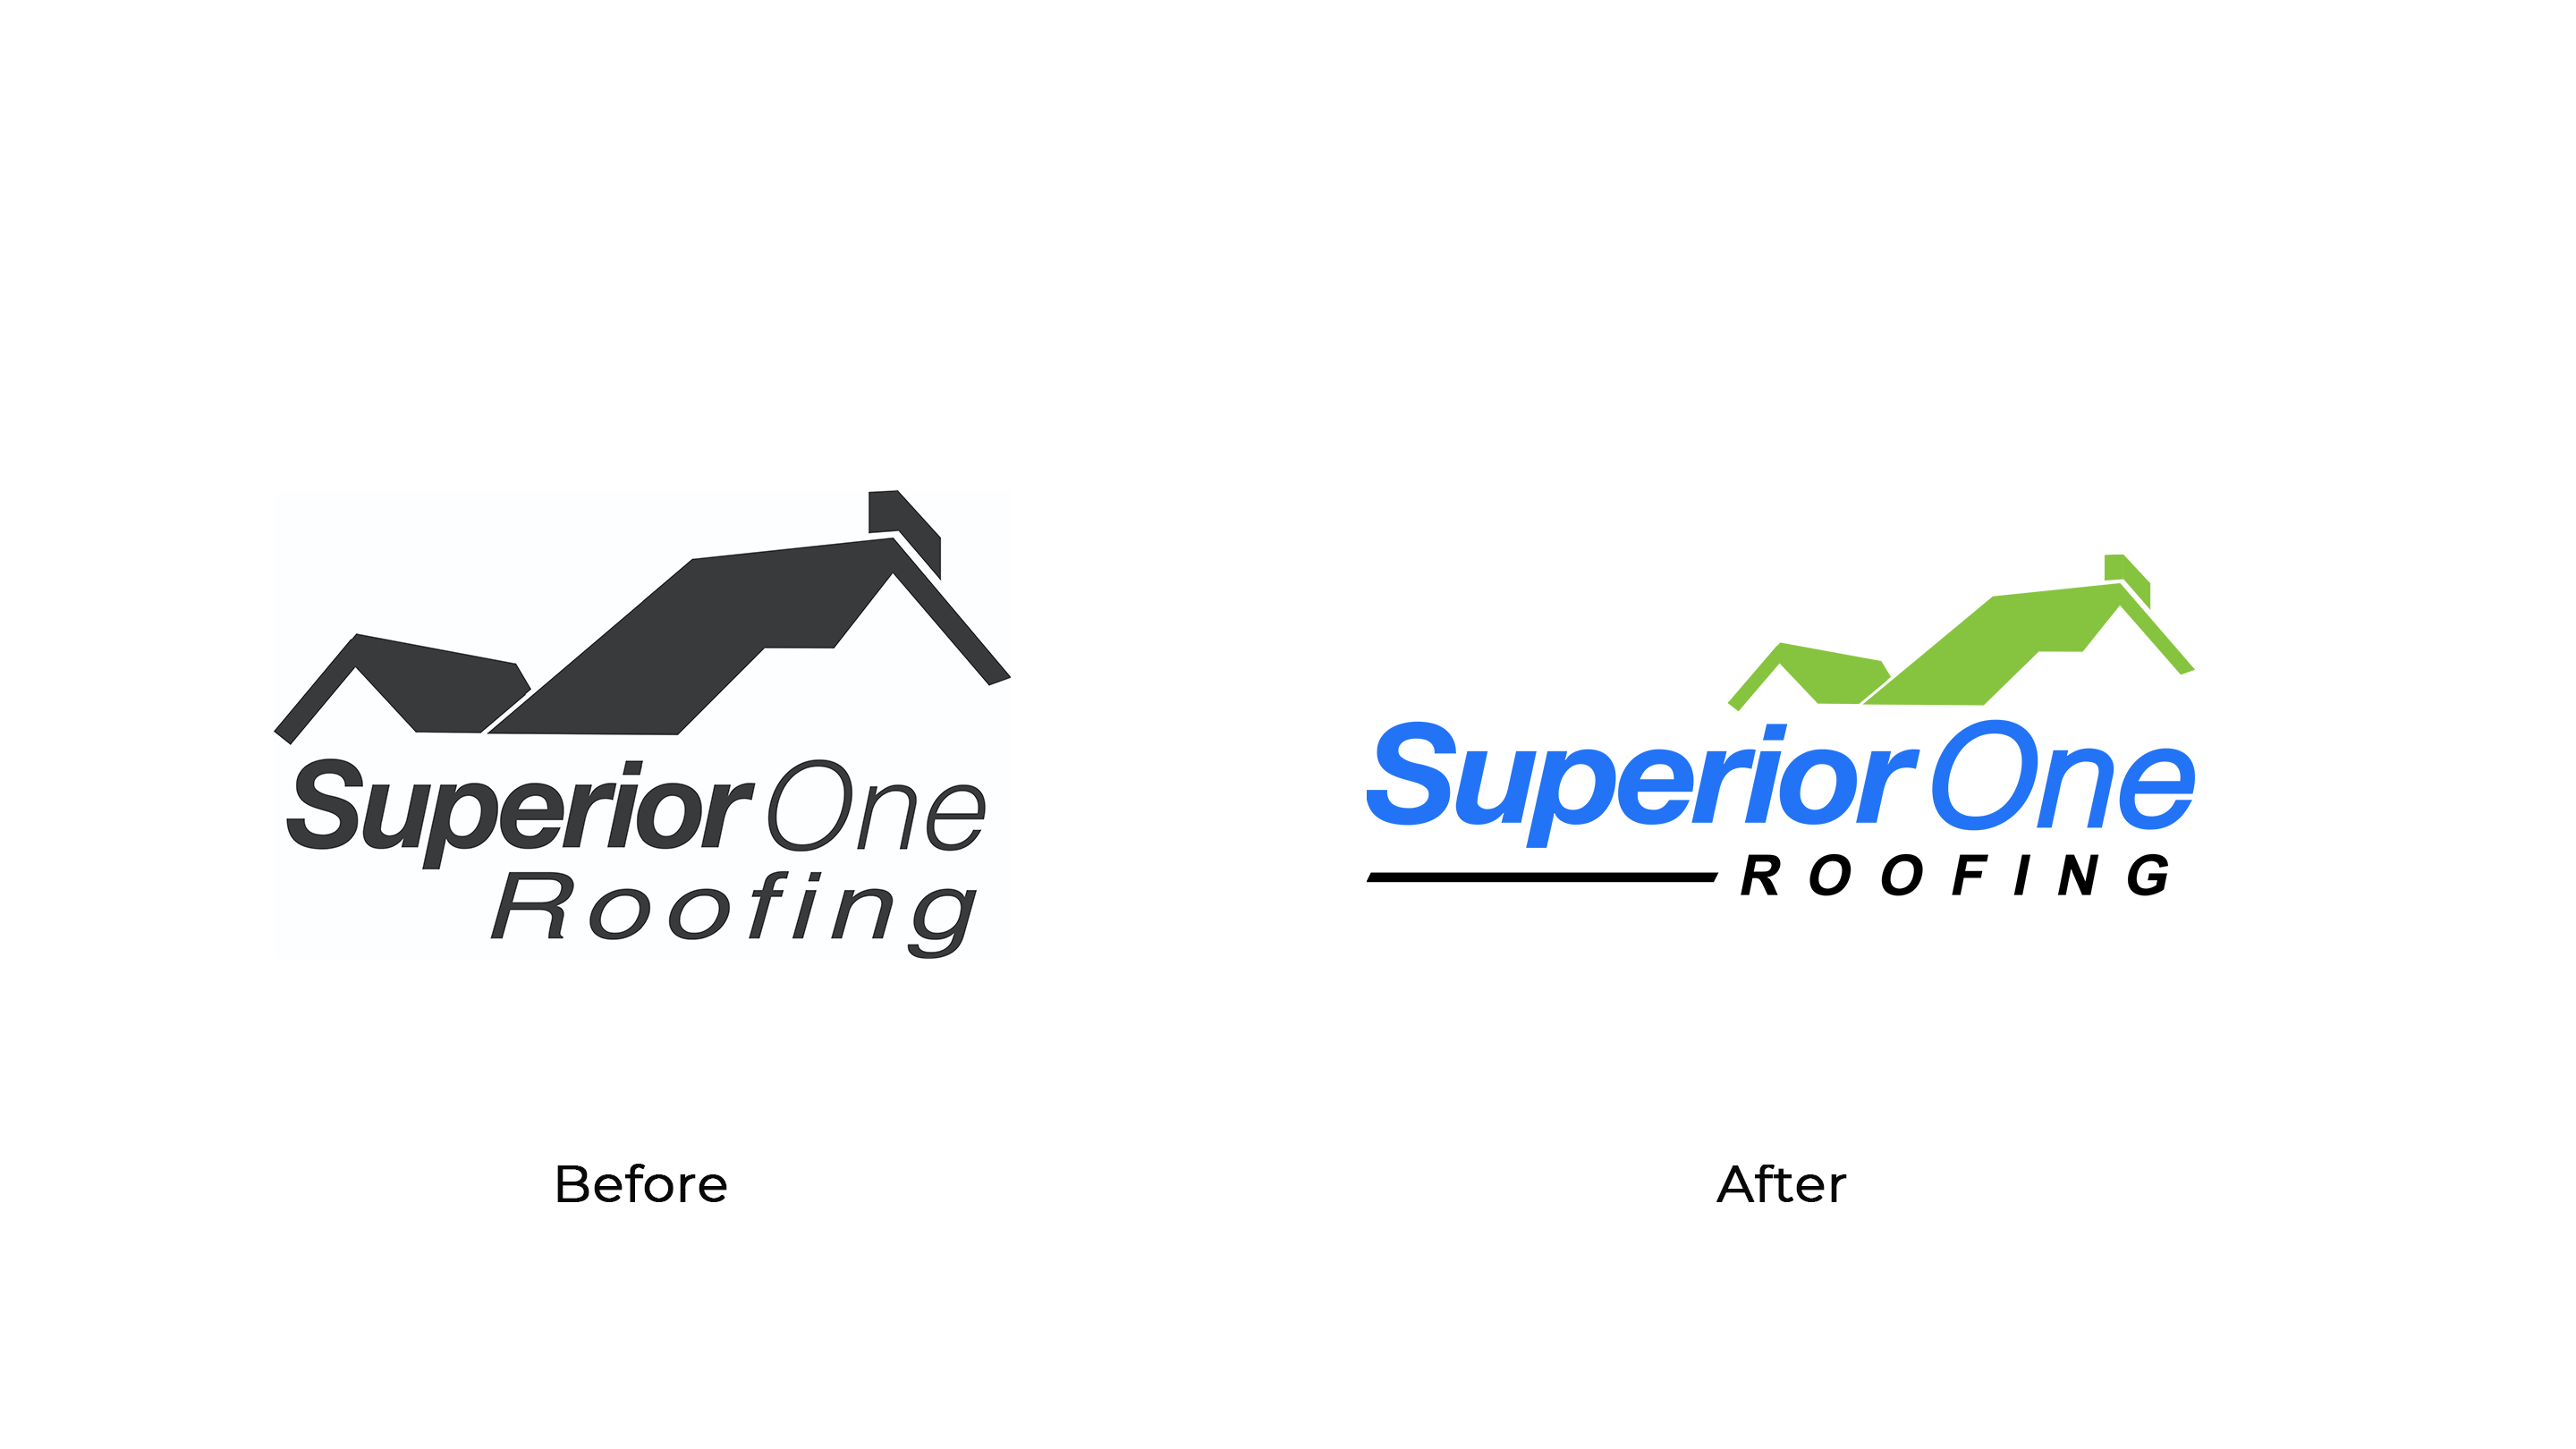 Superior One Roofing - sor logo before after - New Minds Group